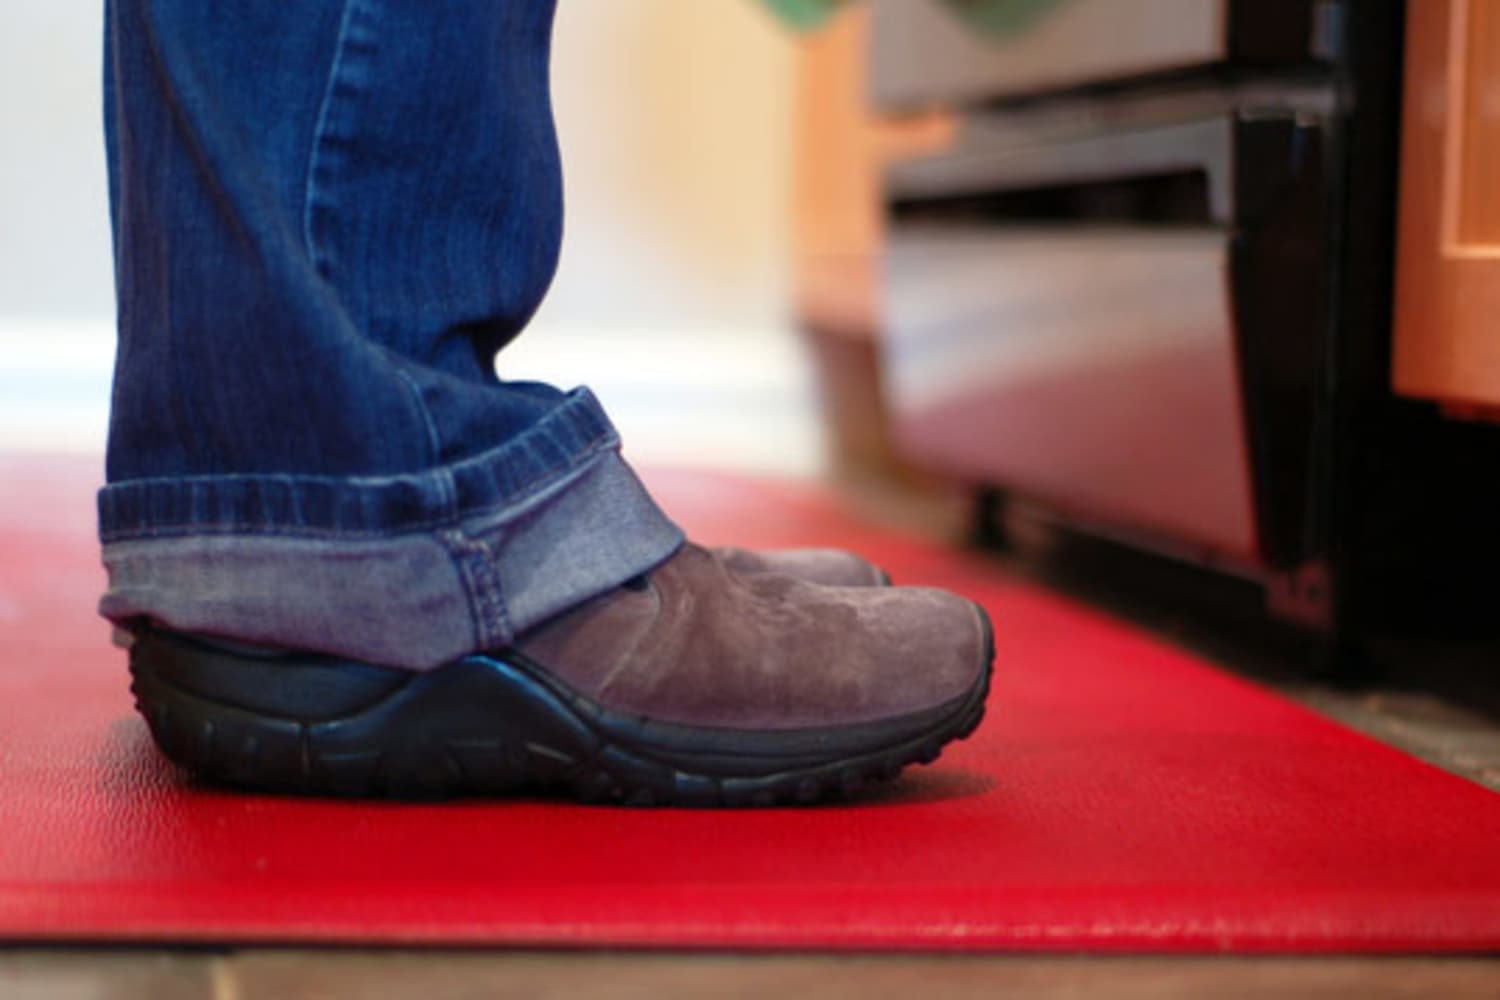 Best Anti-Fatigue Kitchen Mats And Shoes (For All That Passover Cooking)